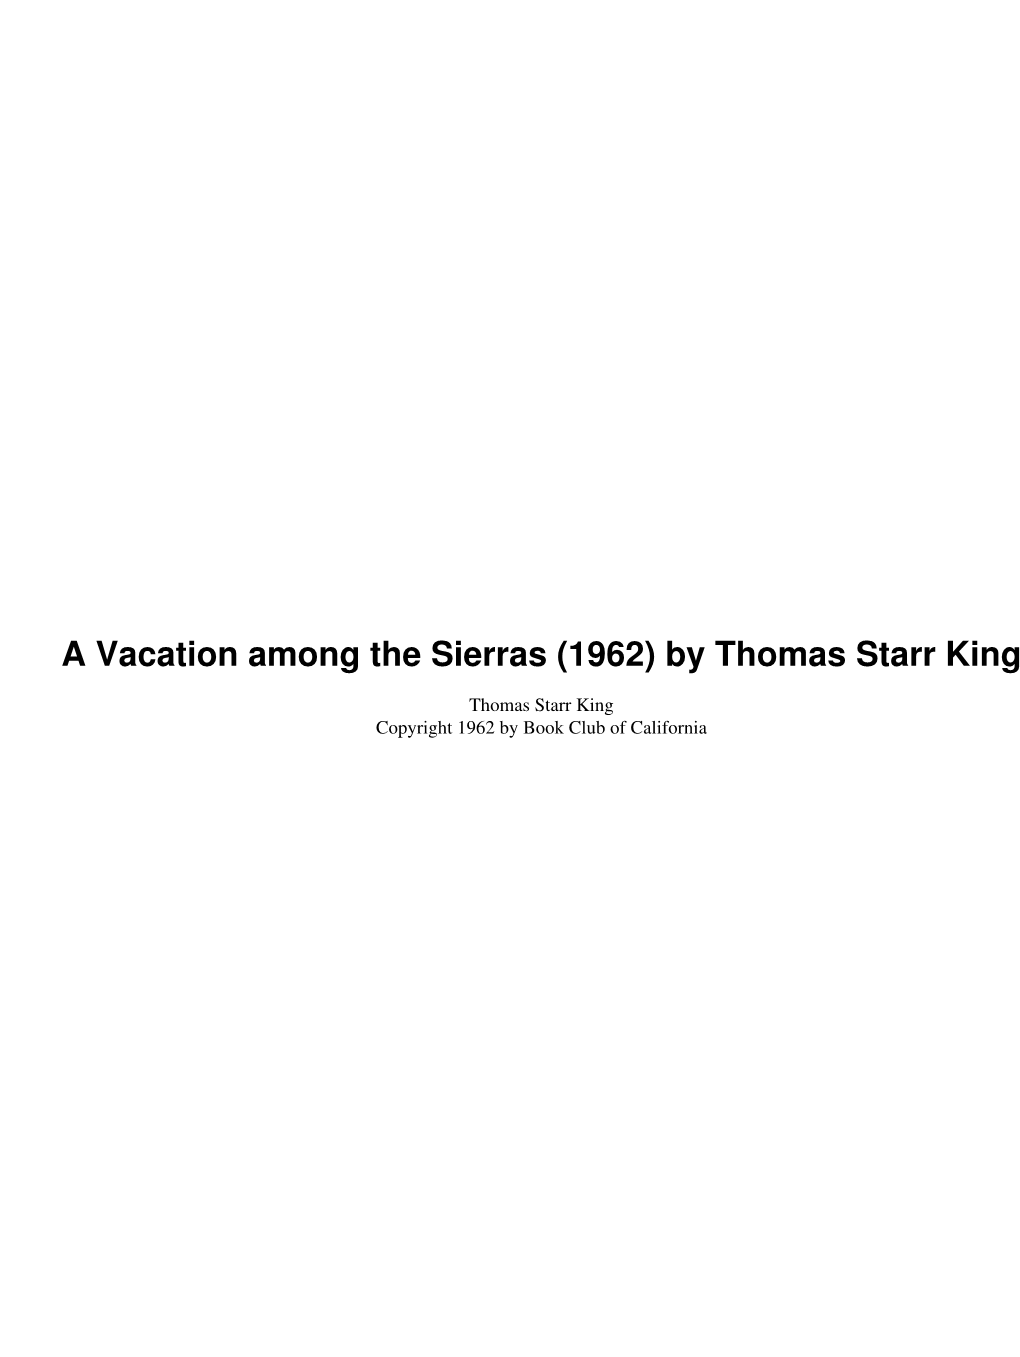 A Vacation Among the Sierras (1962) by Thomas Starr King